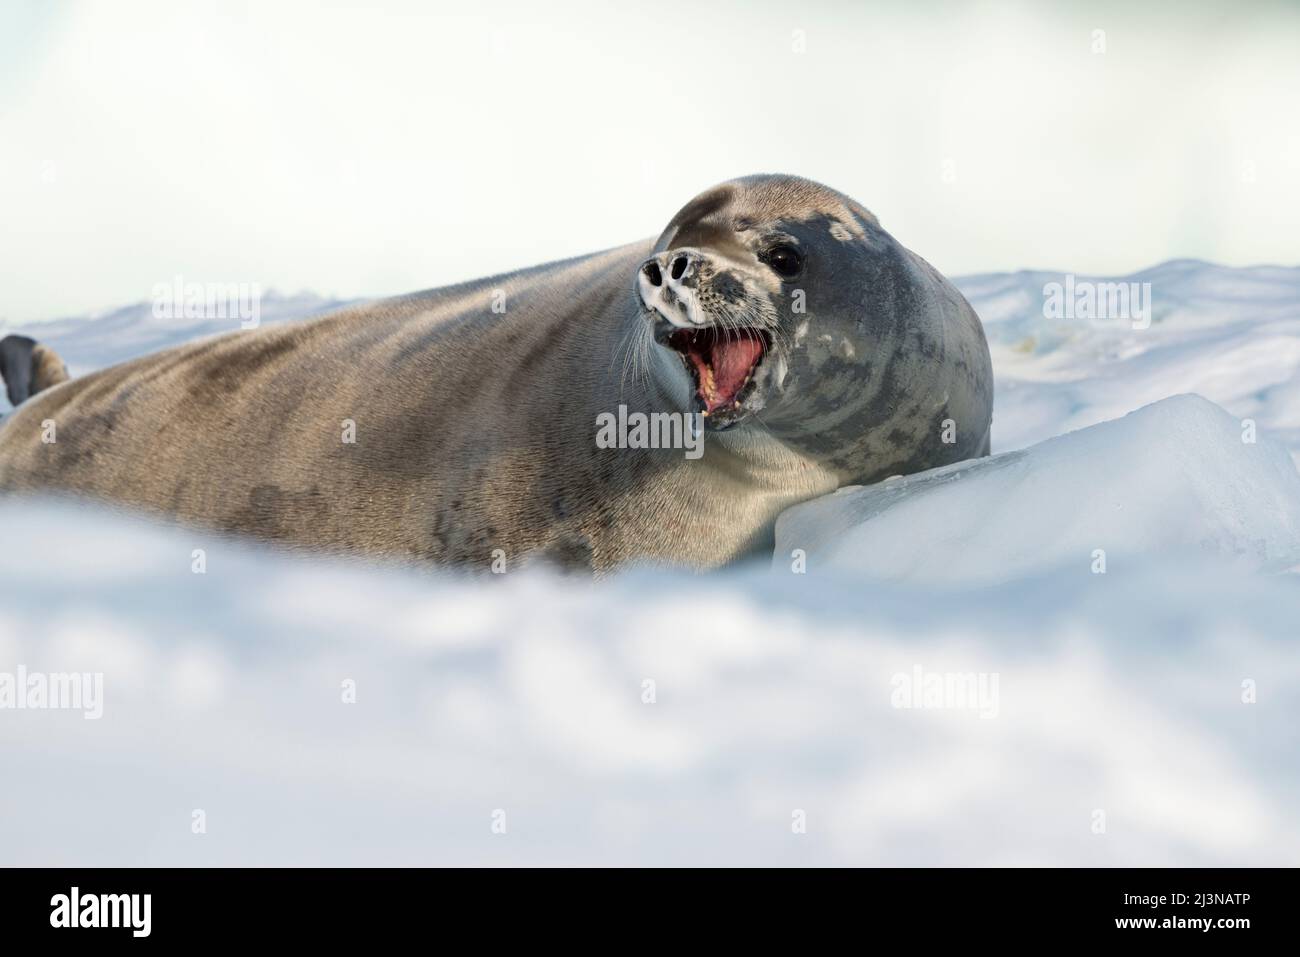 Afternoon light, close up crabeater seal (Lobodon carcinophagus) on ice floe, Marguerite Bay, Antarctica, Stock Photo